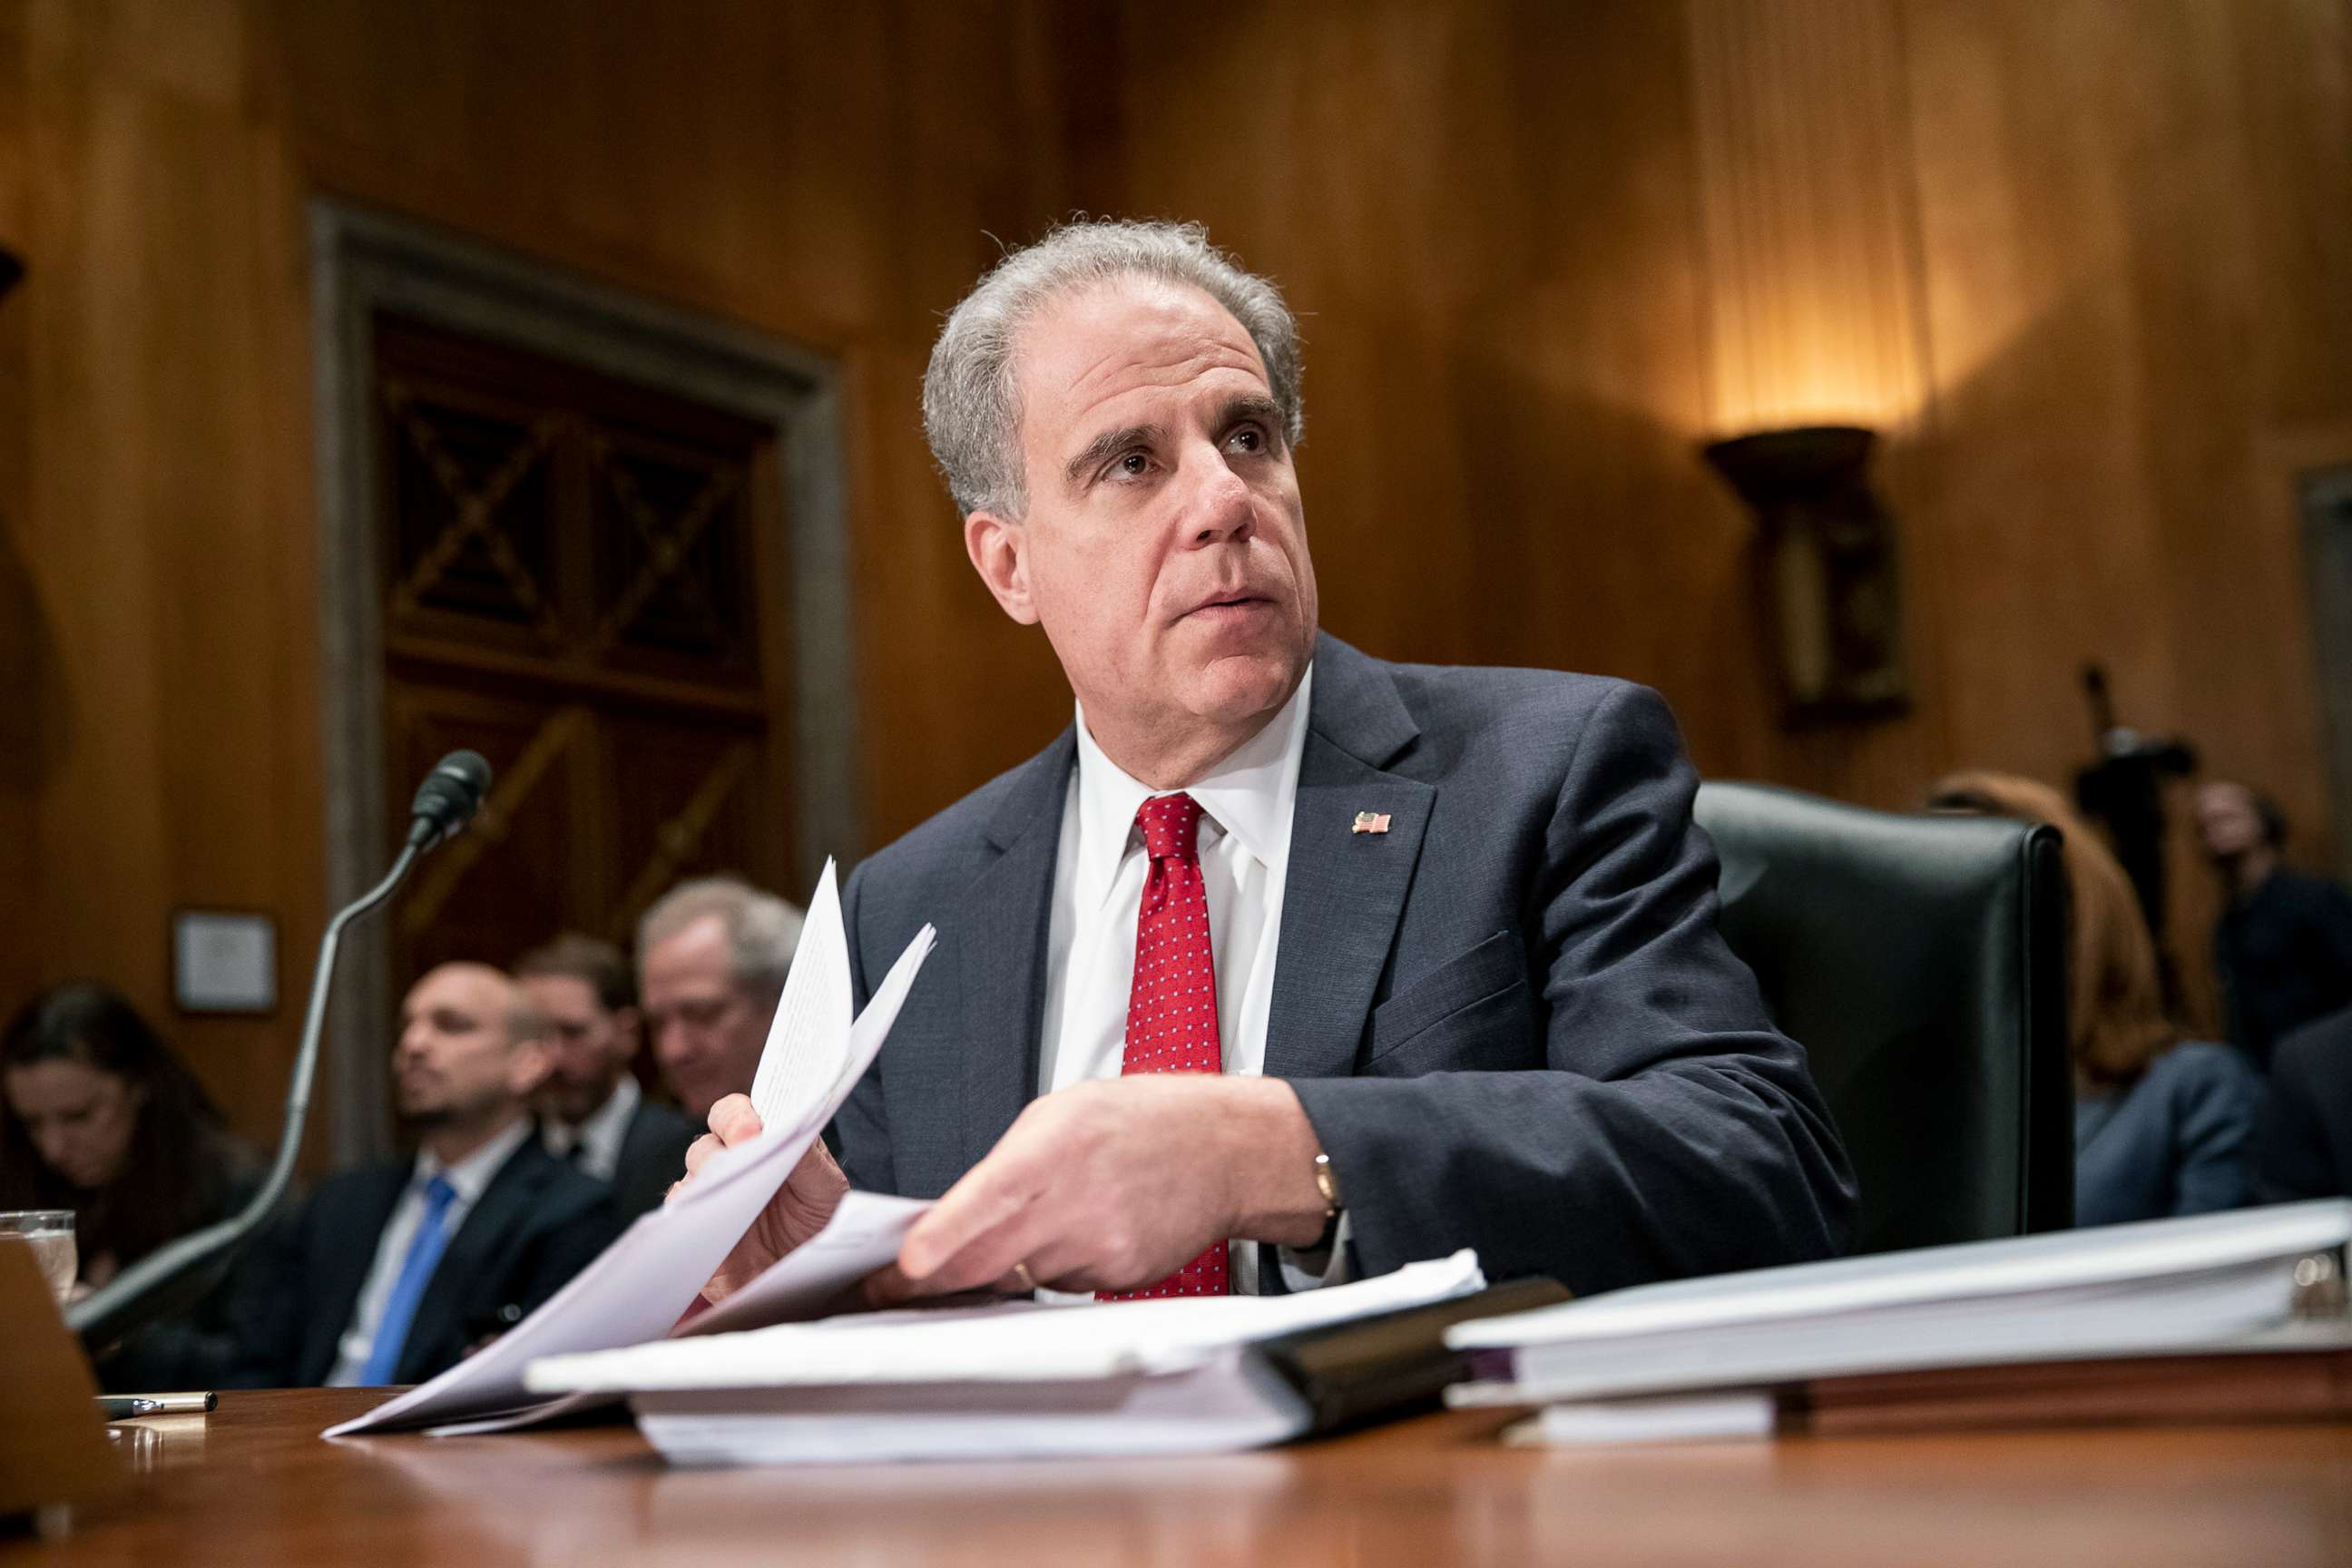 PHOTO: Department of Justice Inspector General Michael Horowitz prepares to testify in a Senate Committee On Homeland Security And Governmental Affairs hearing at the U.S. Capitol, Dec. 18, 2019, in Washington, D.C.